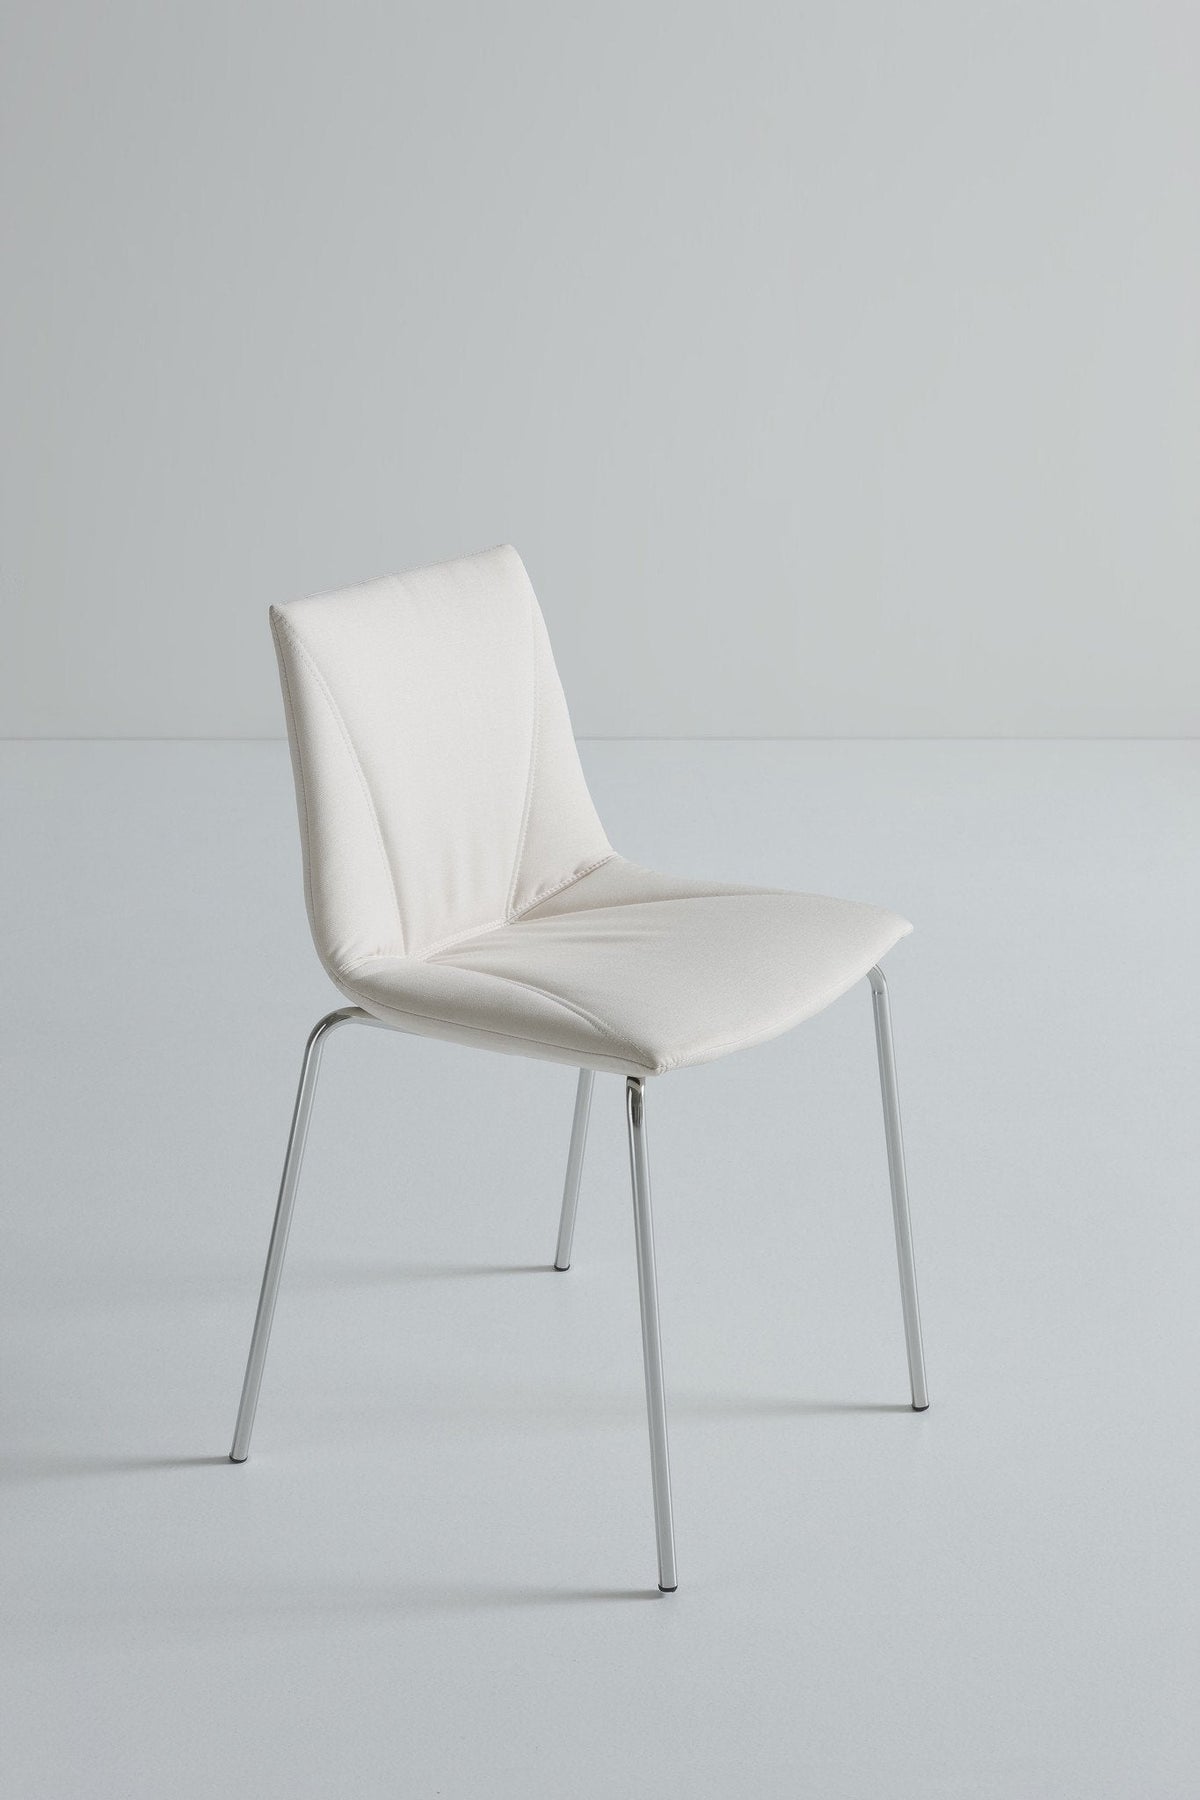 Colorfive Side Chair c/w Metal Legs-Gaber-Contract Furniture Store